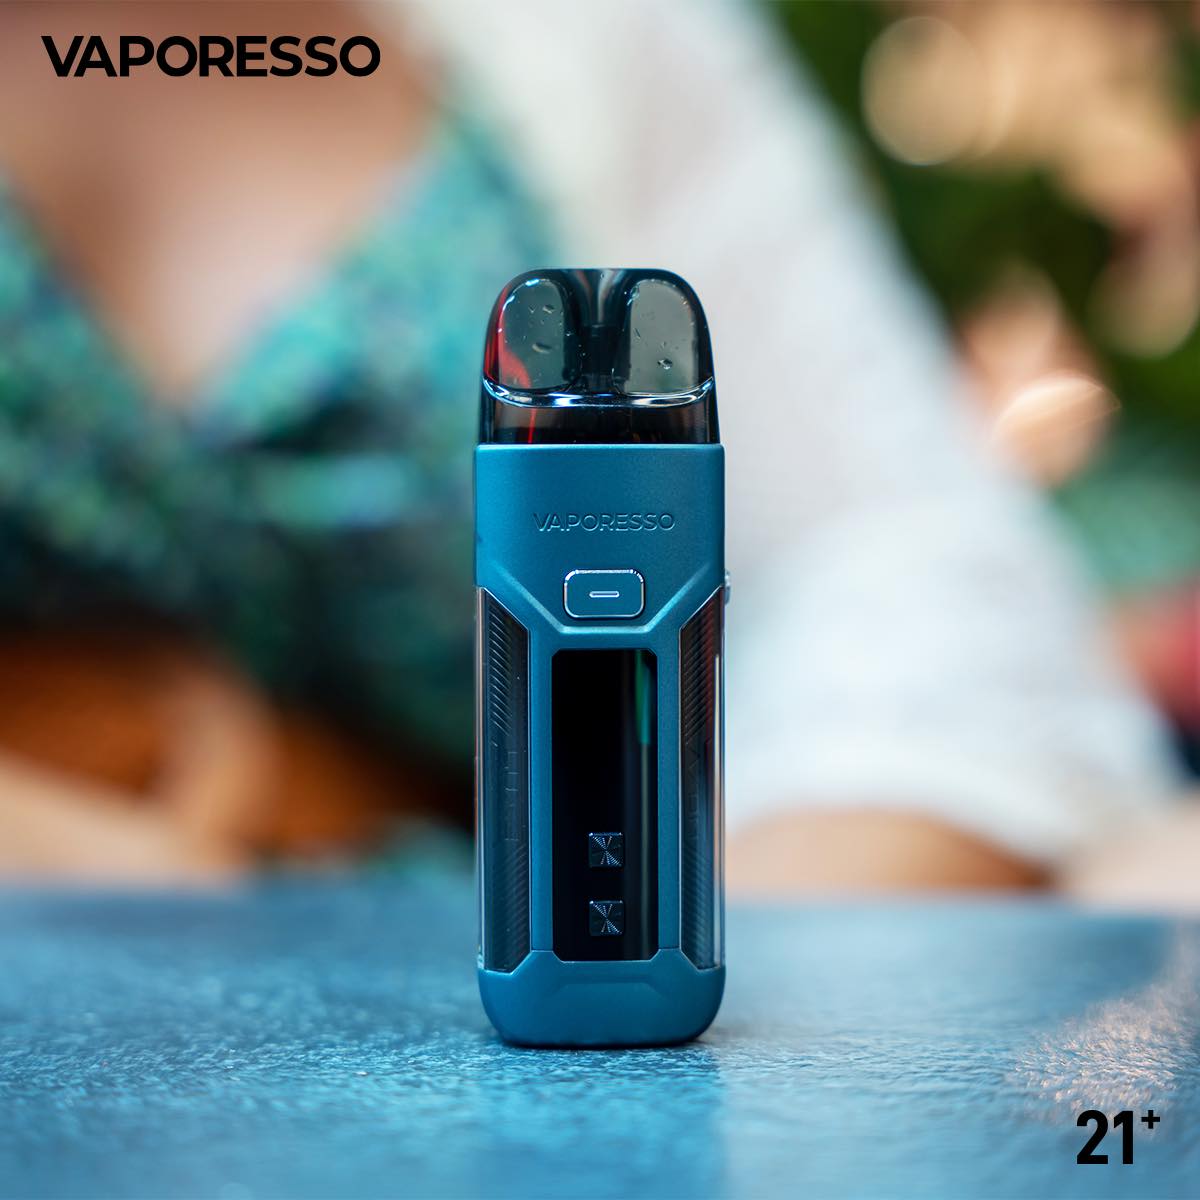 Vaporesso TANK MOD Reviews: Flavor, Power, and Unleashing Vaping Excitement!